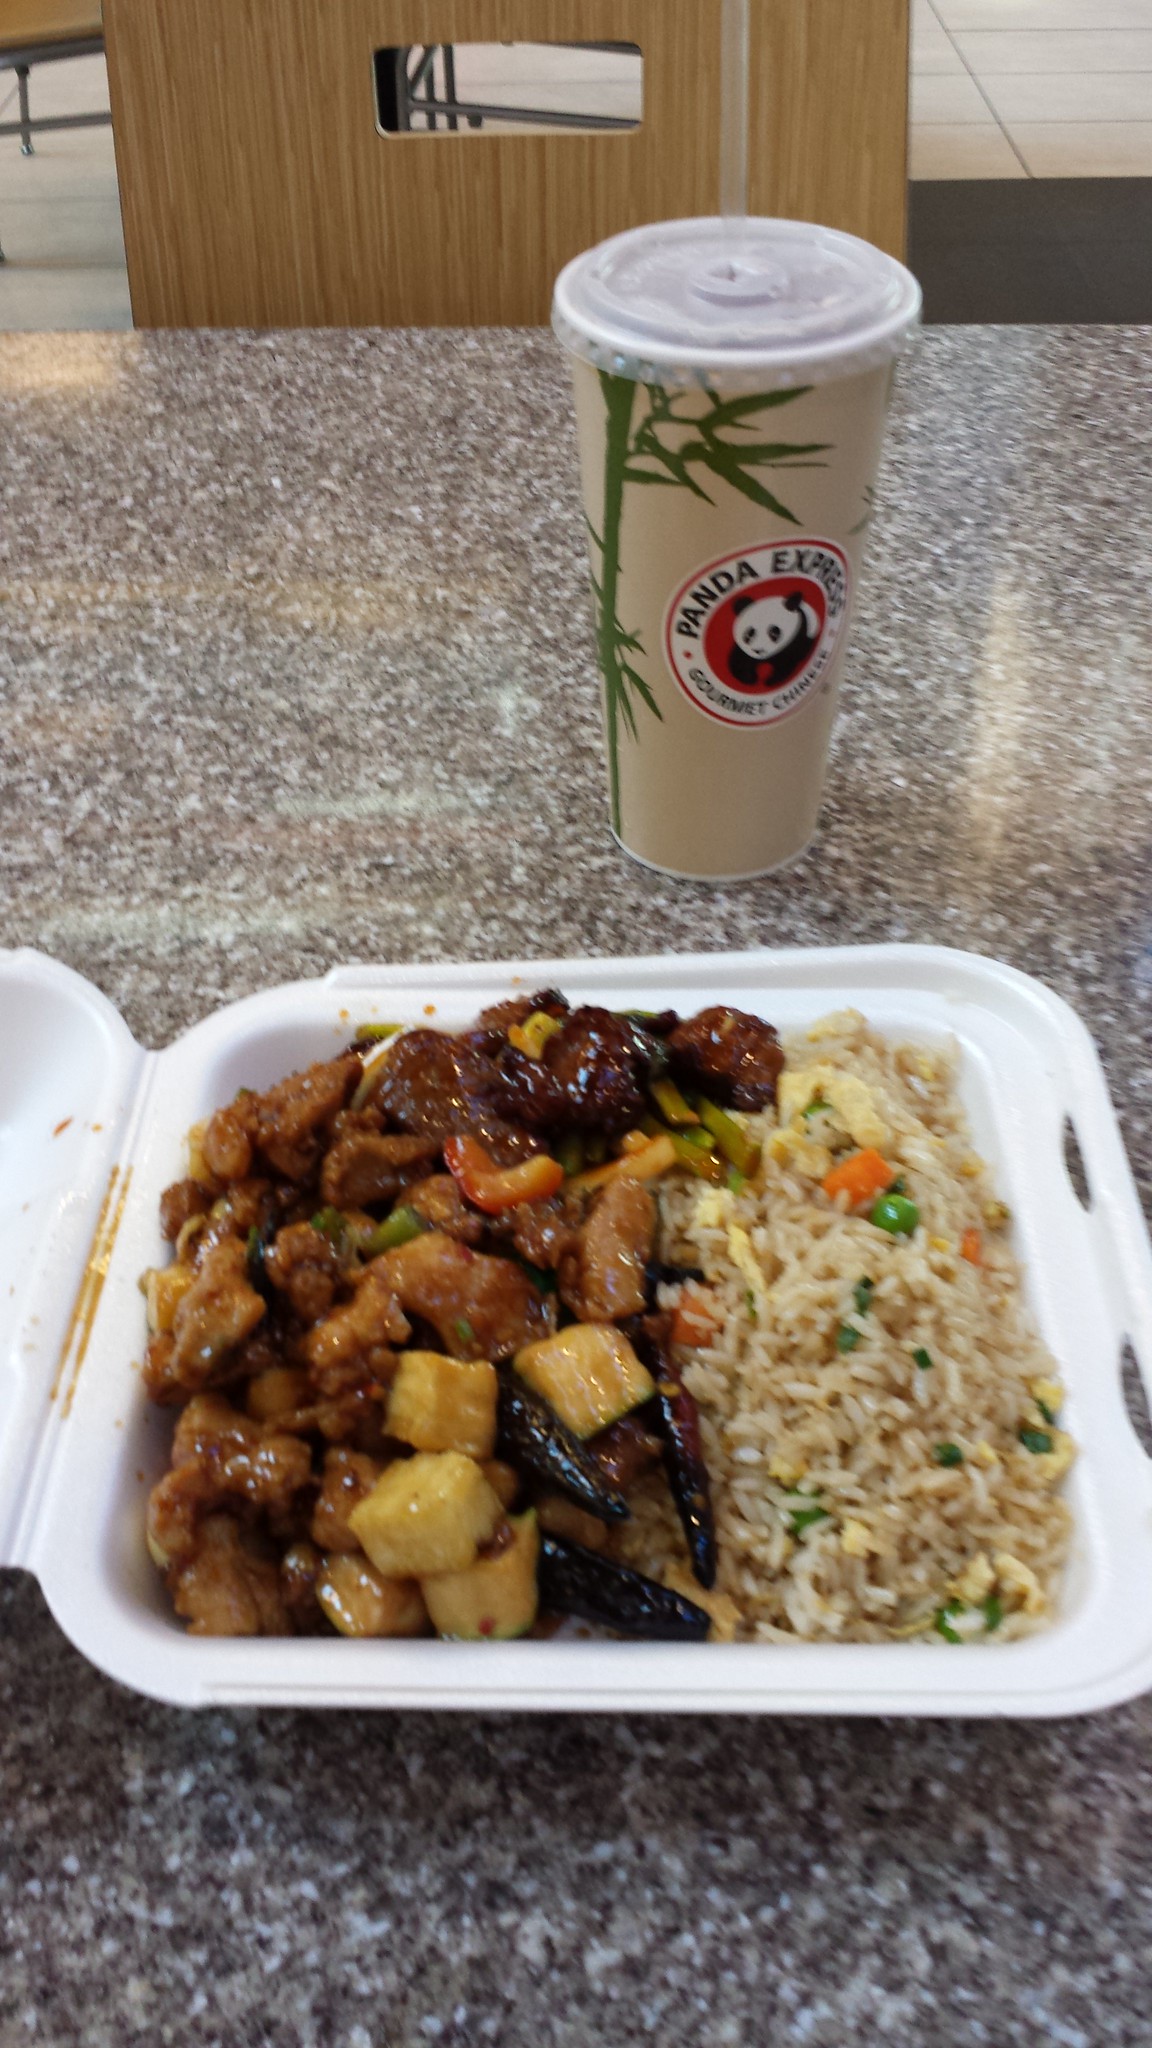 Panda Express for lunch - yay!